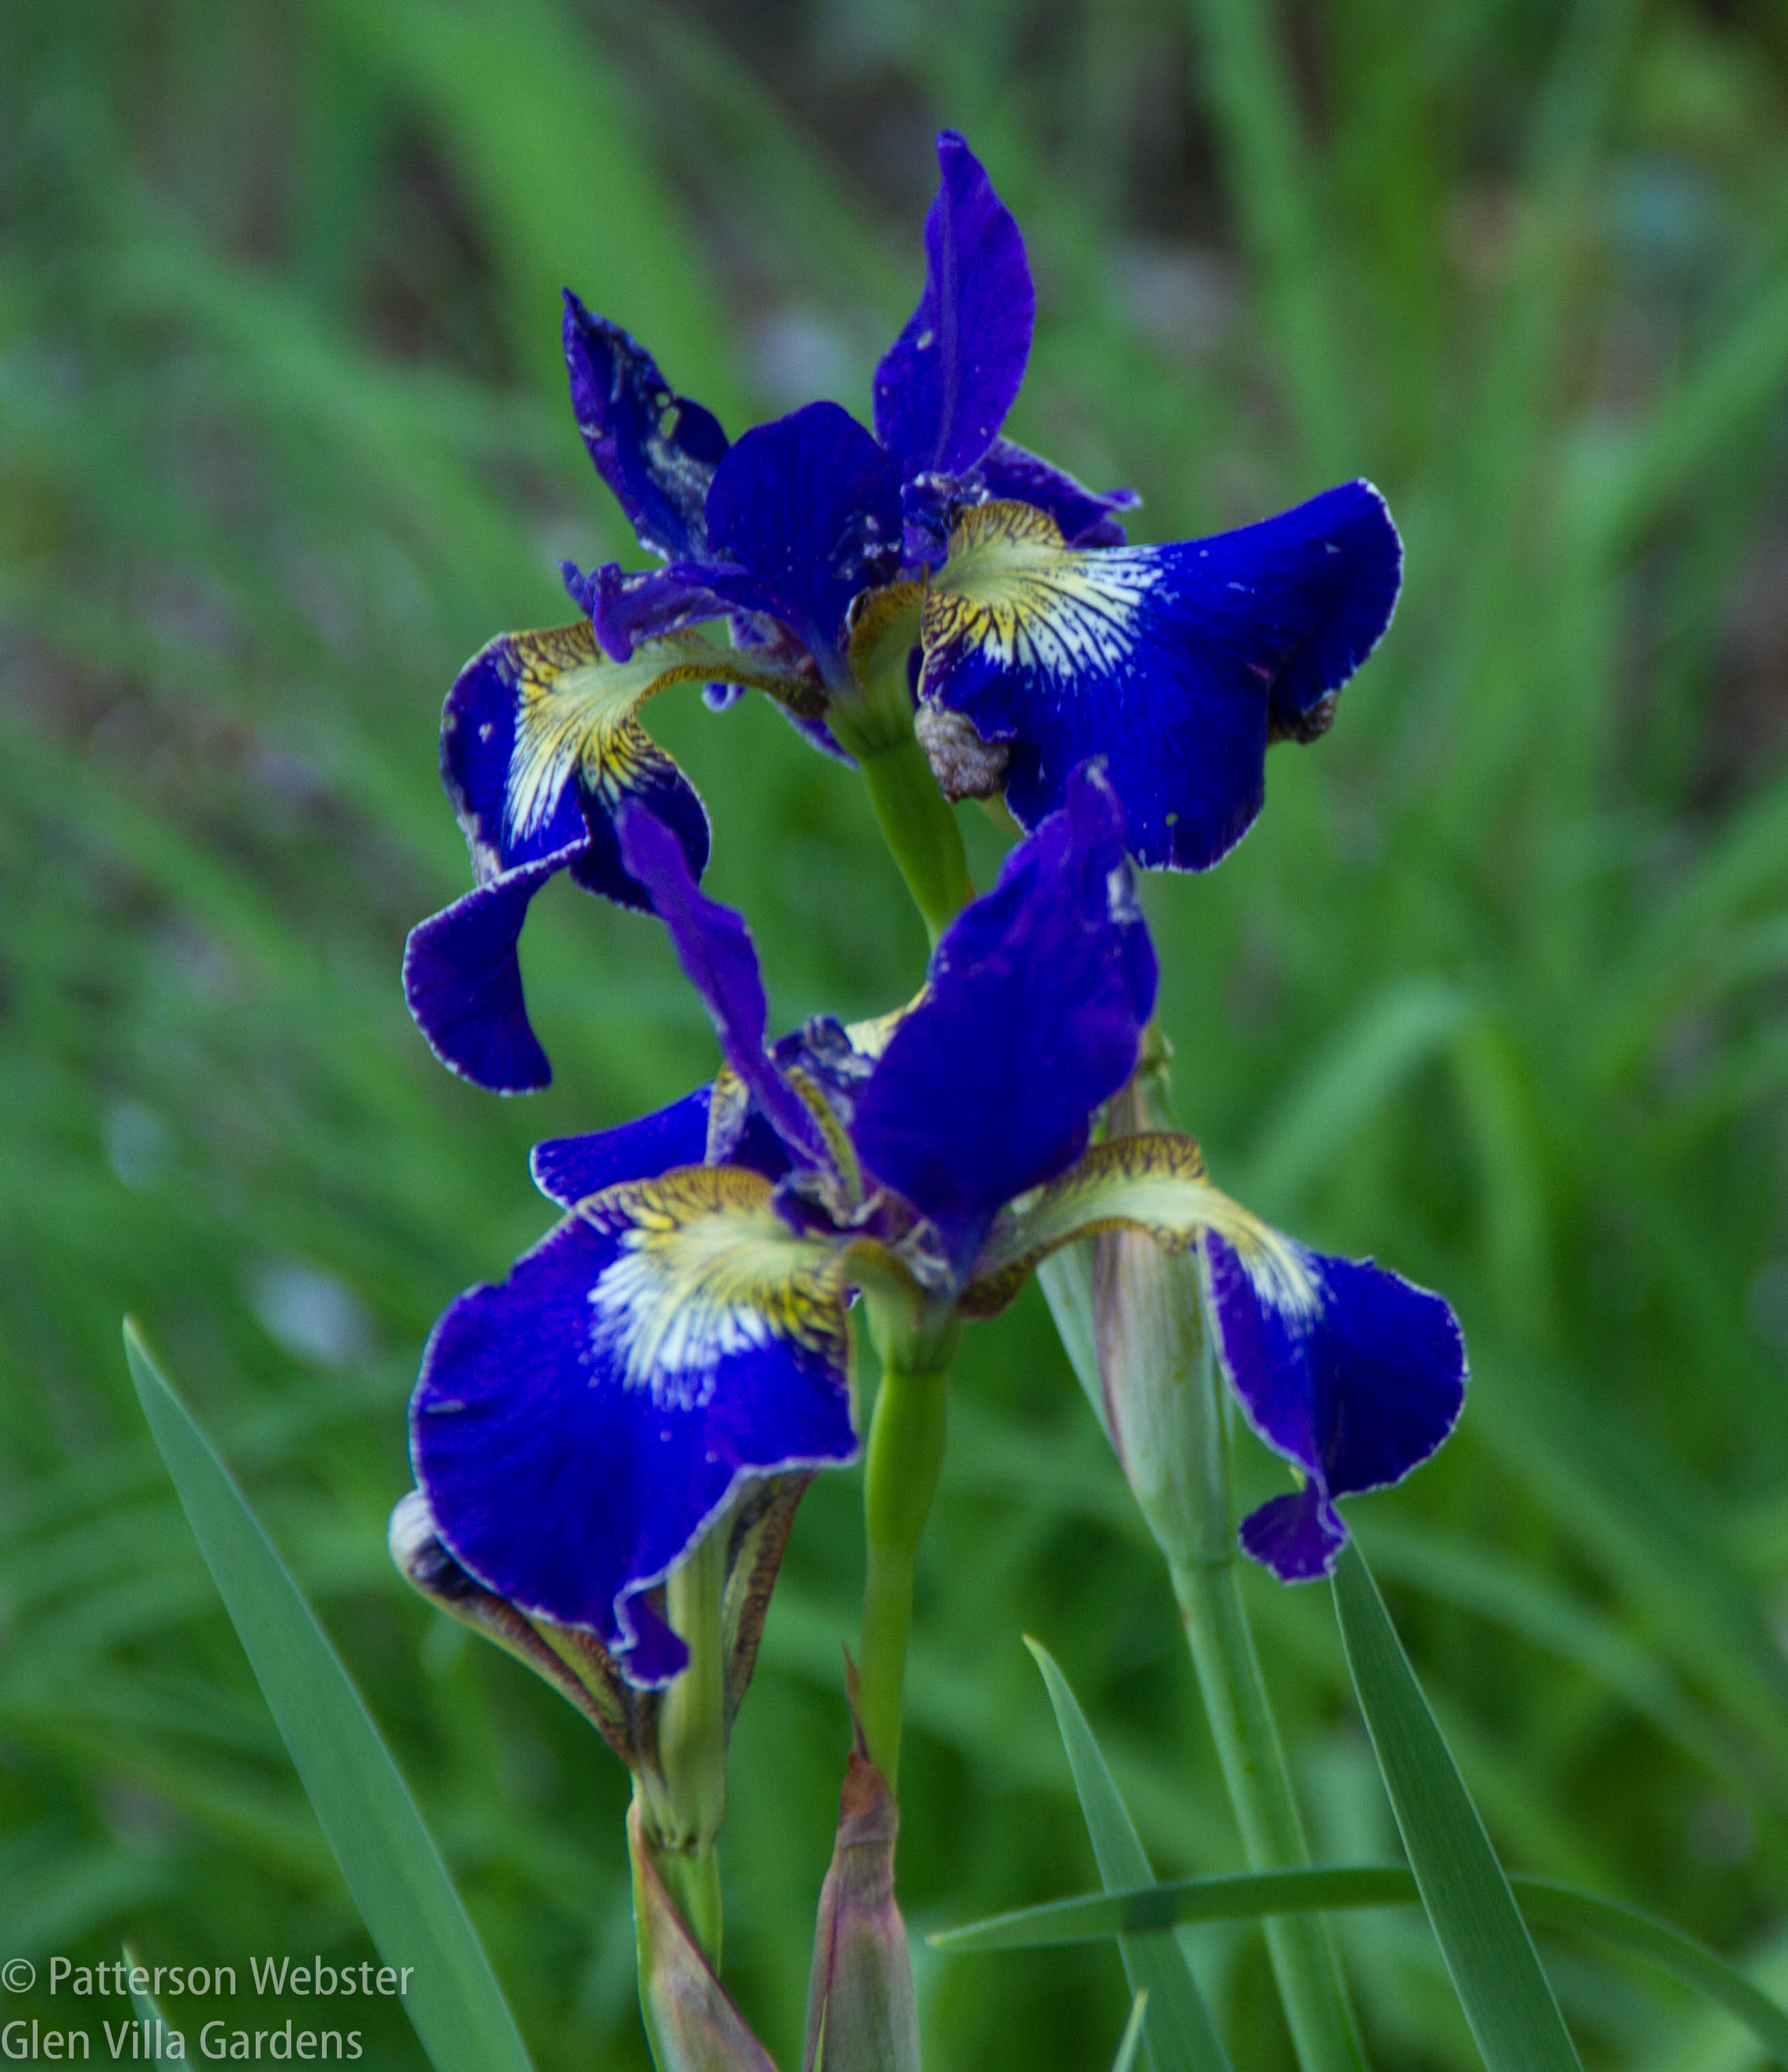 I wish I could remember the name of this Iris. The colour is stunning.